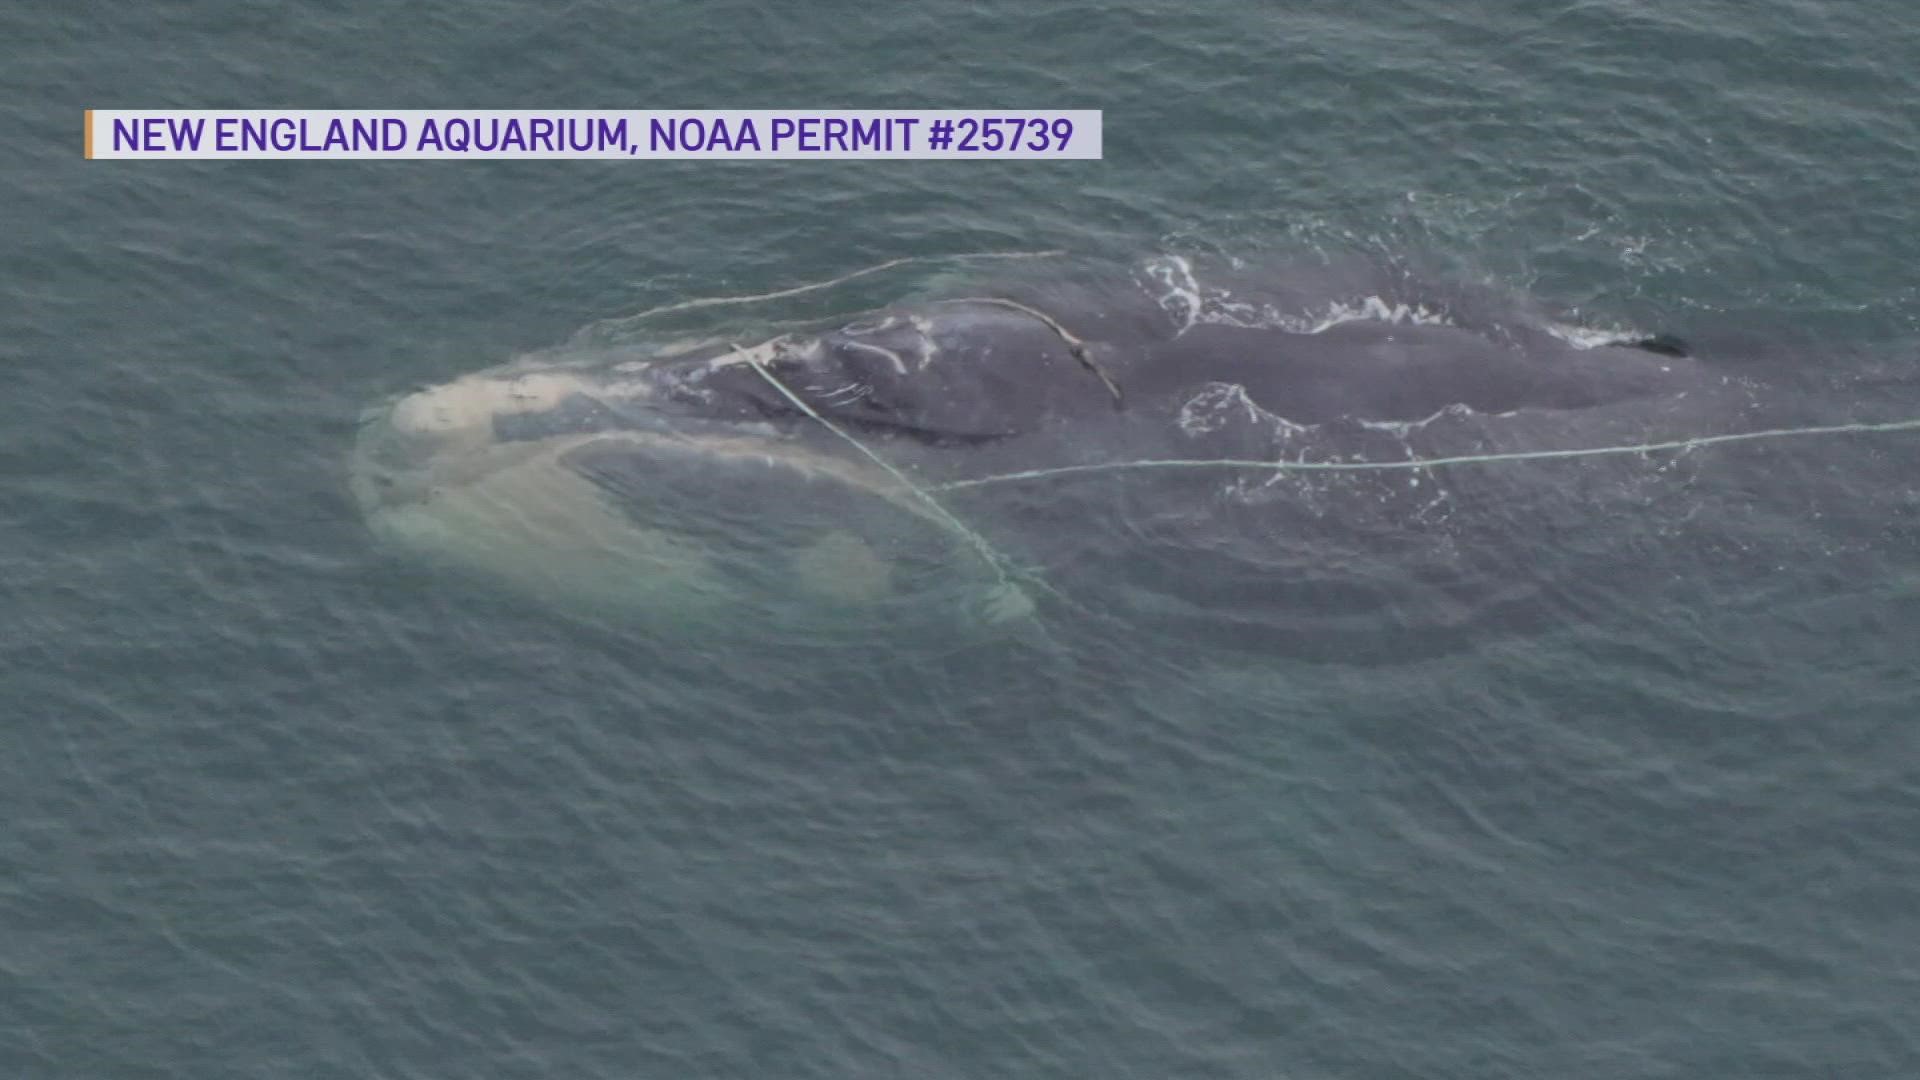 Scientists say the endangered right whale's death is all but certain.